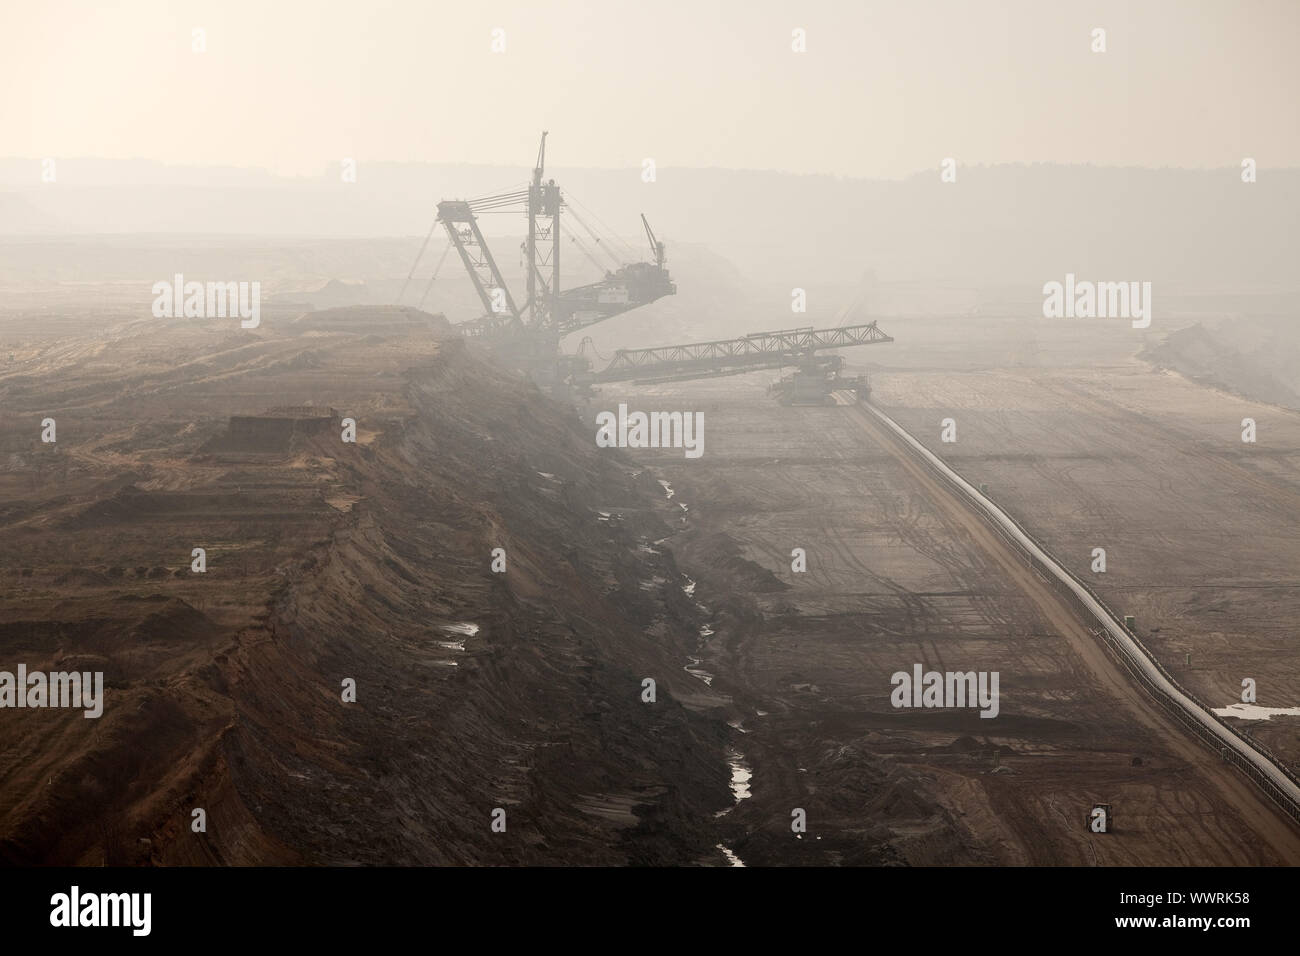 brown coal surface mining Hambach with spreader and tripper car in the mist, Elsdorf, Germany Stock Photo